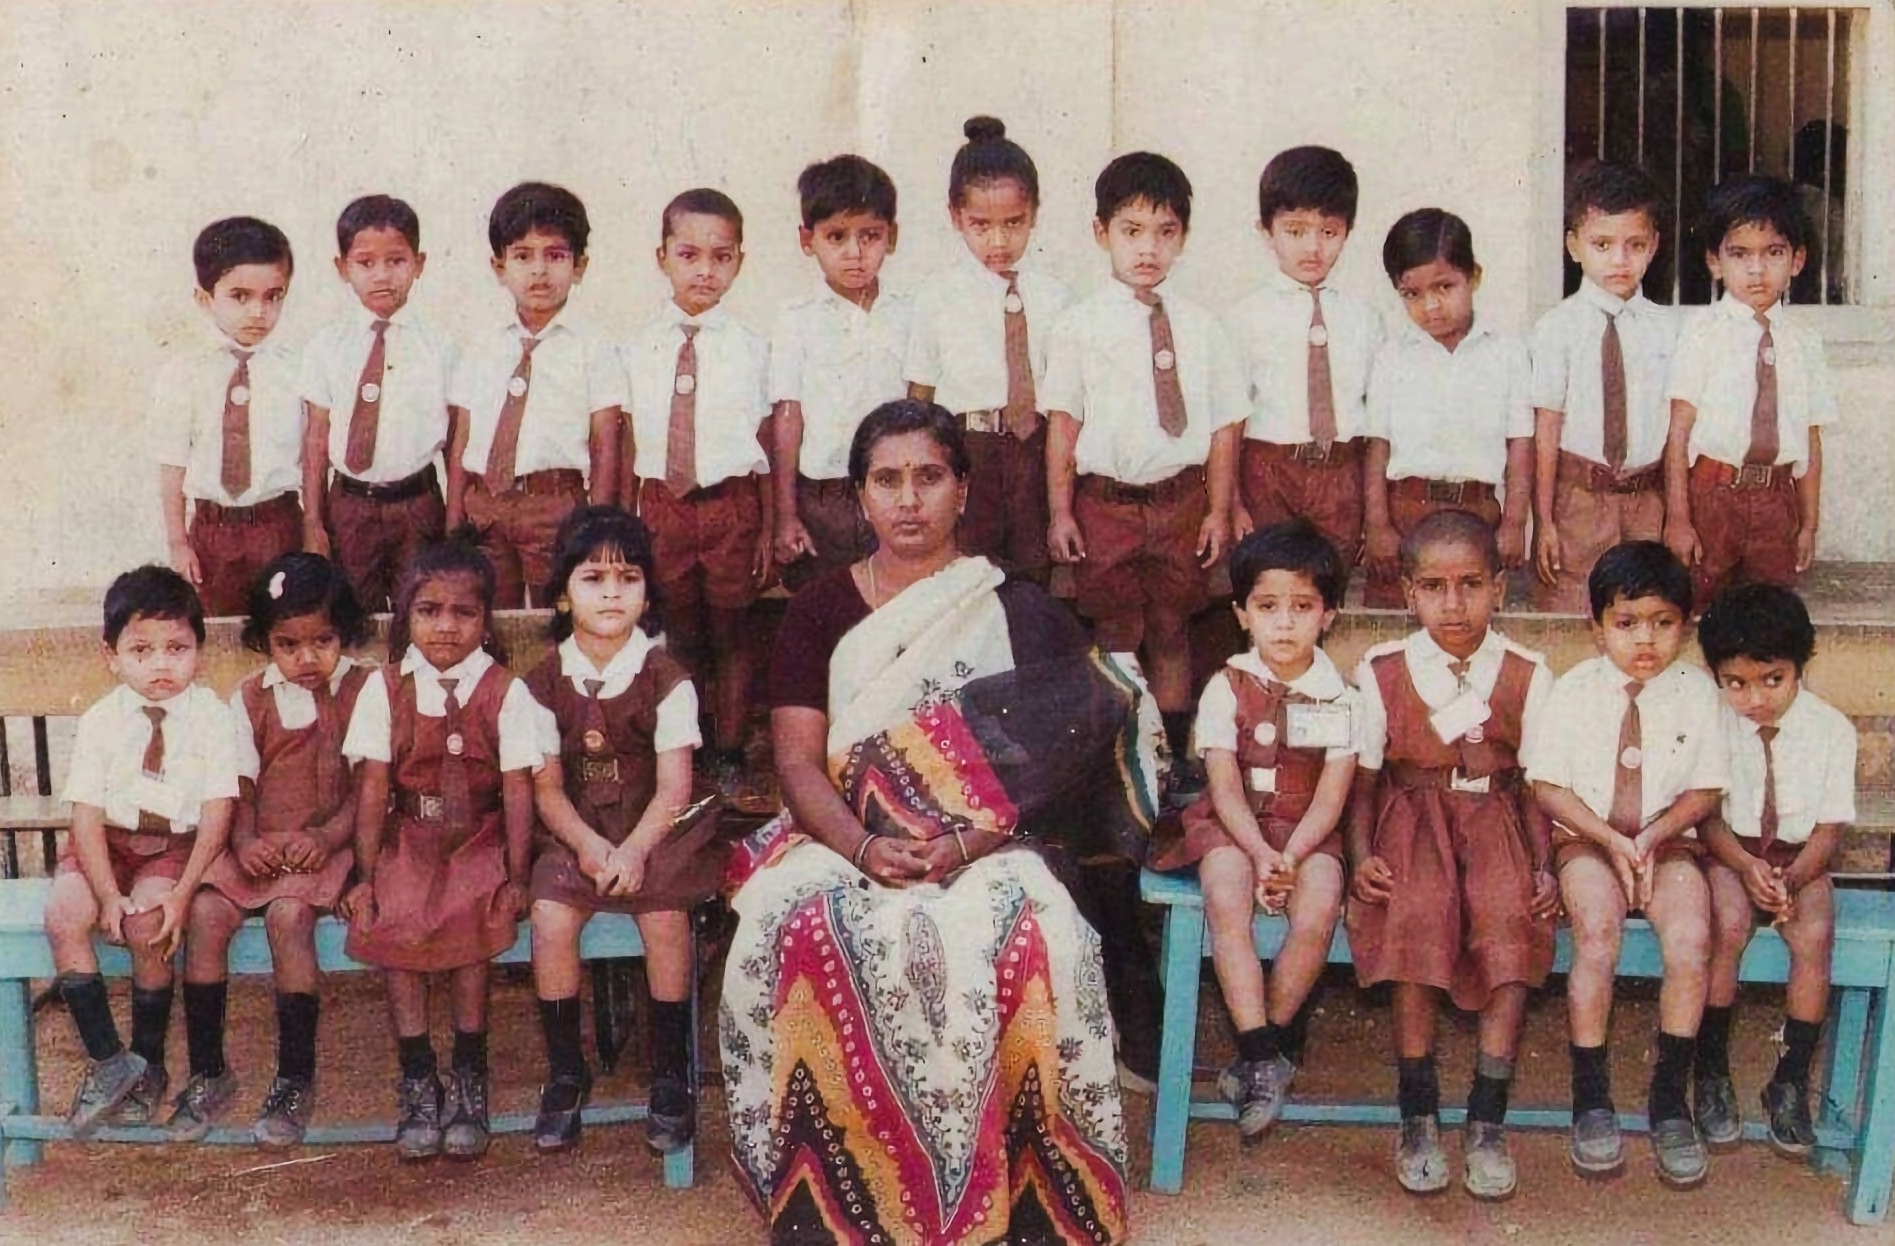 Telugu Actor Vijay Deverakonda (Second Row - Fourth from Right) Childhood School Pic with his Classmates & Teacher | Telugu Actor Vijay Deverakonda Childhood Photos | Real-Life Photos